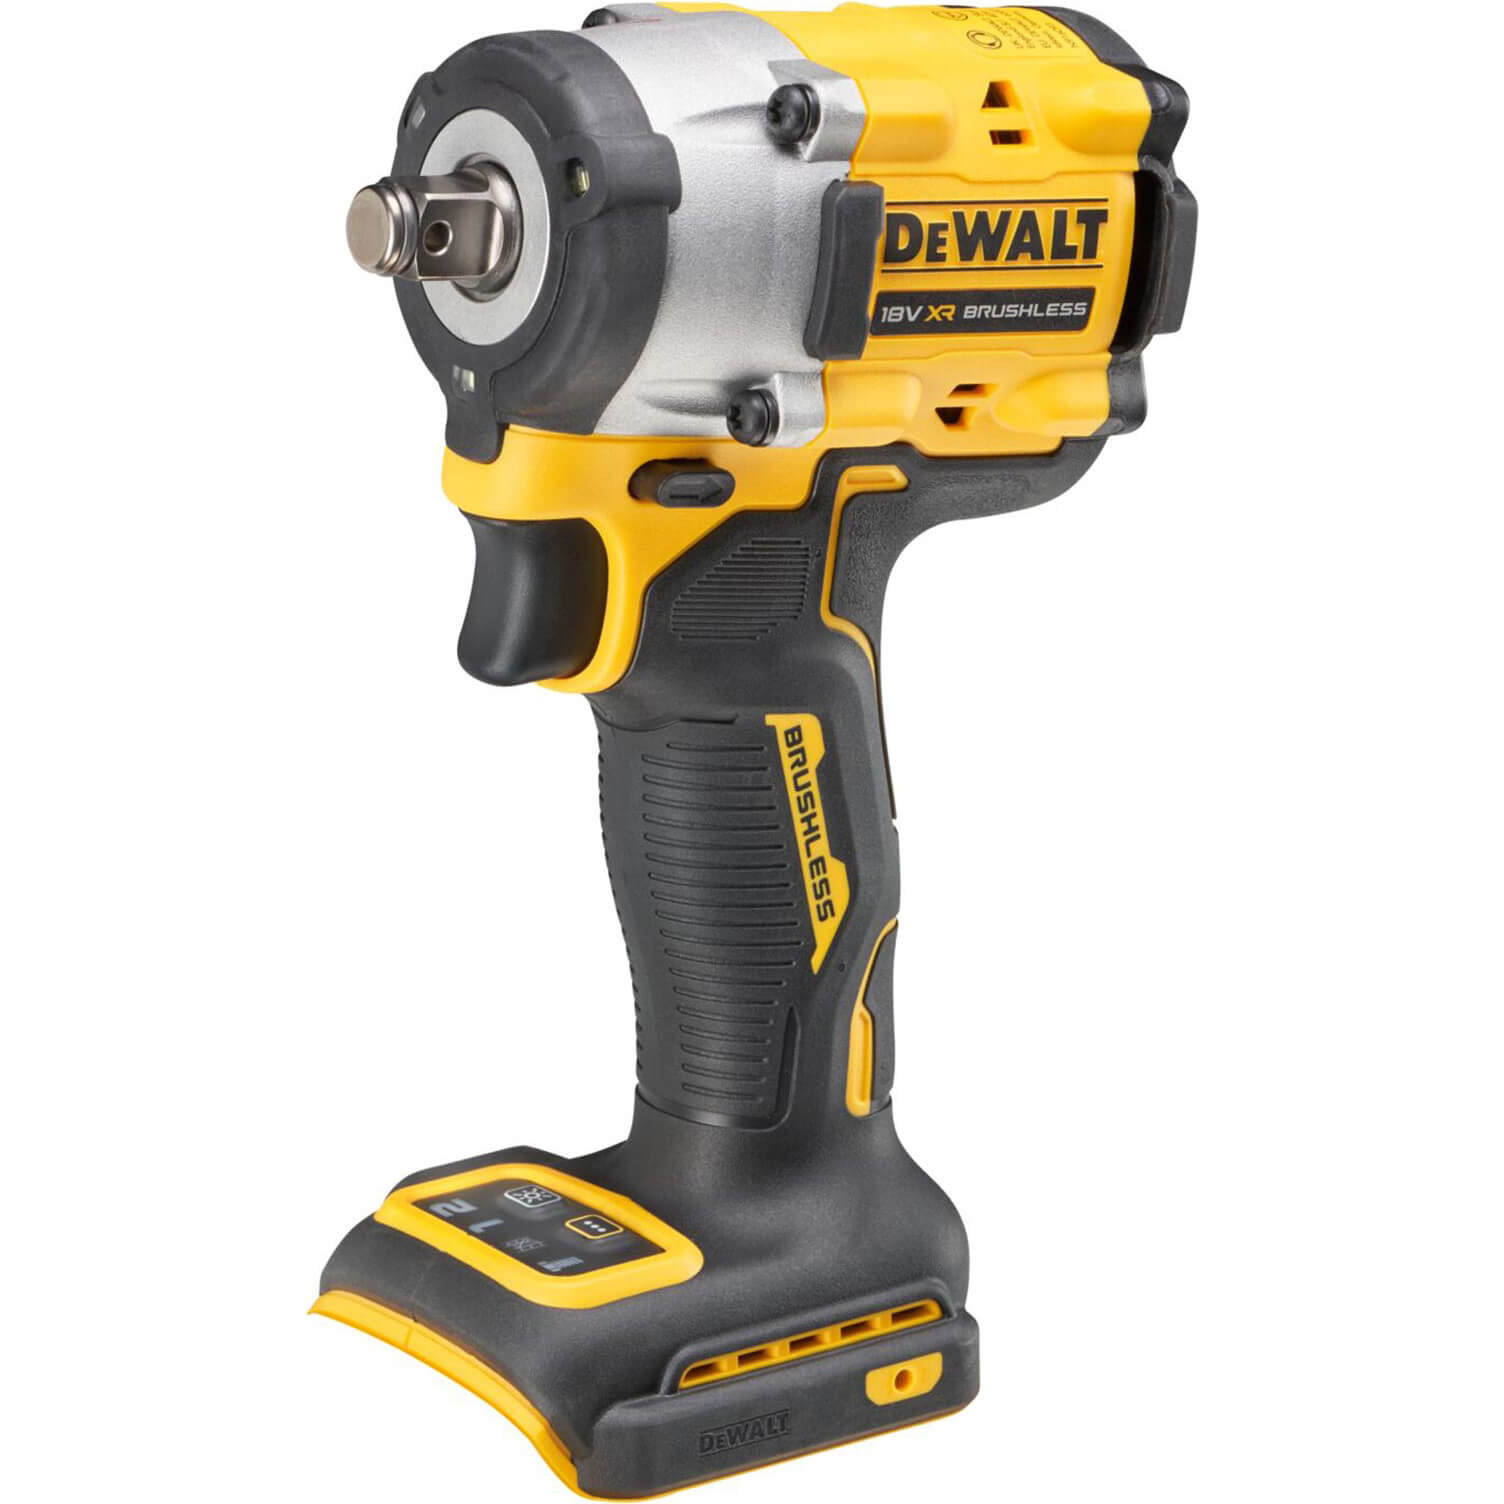 DeWalt DCF921 18v XR Cordless Brushless 1/2" Compact Impact Wrench No Batteries No Charger No Case